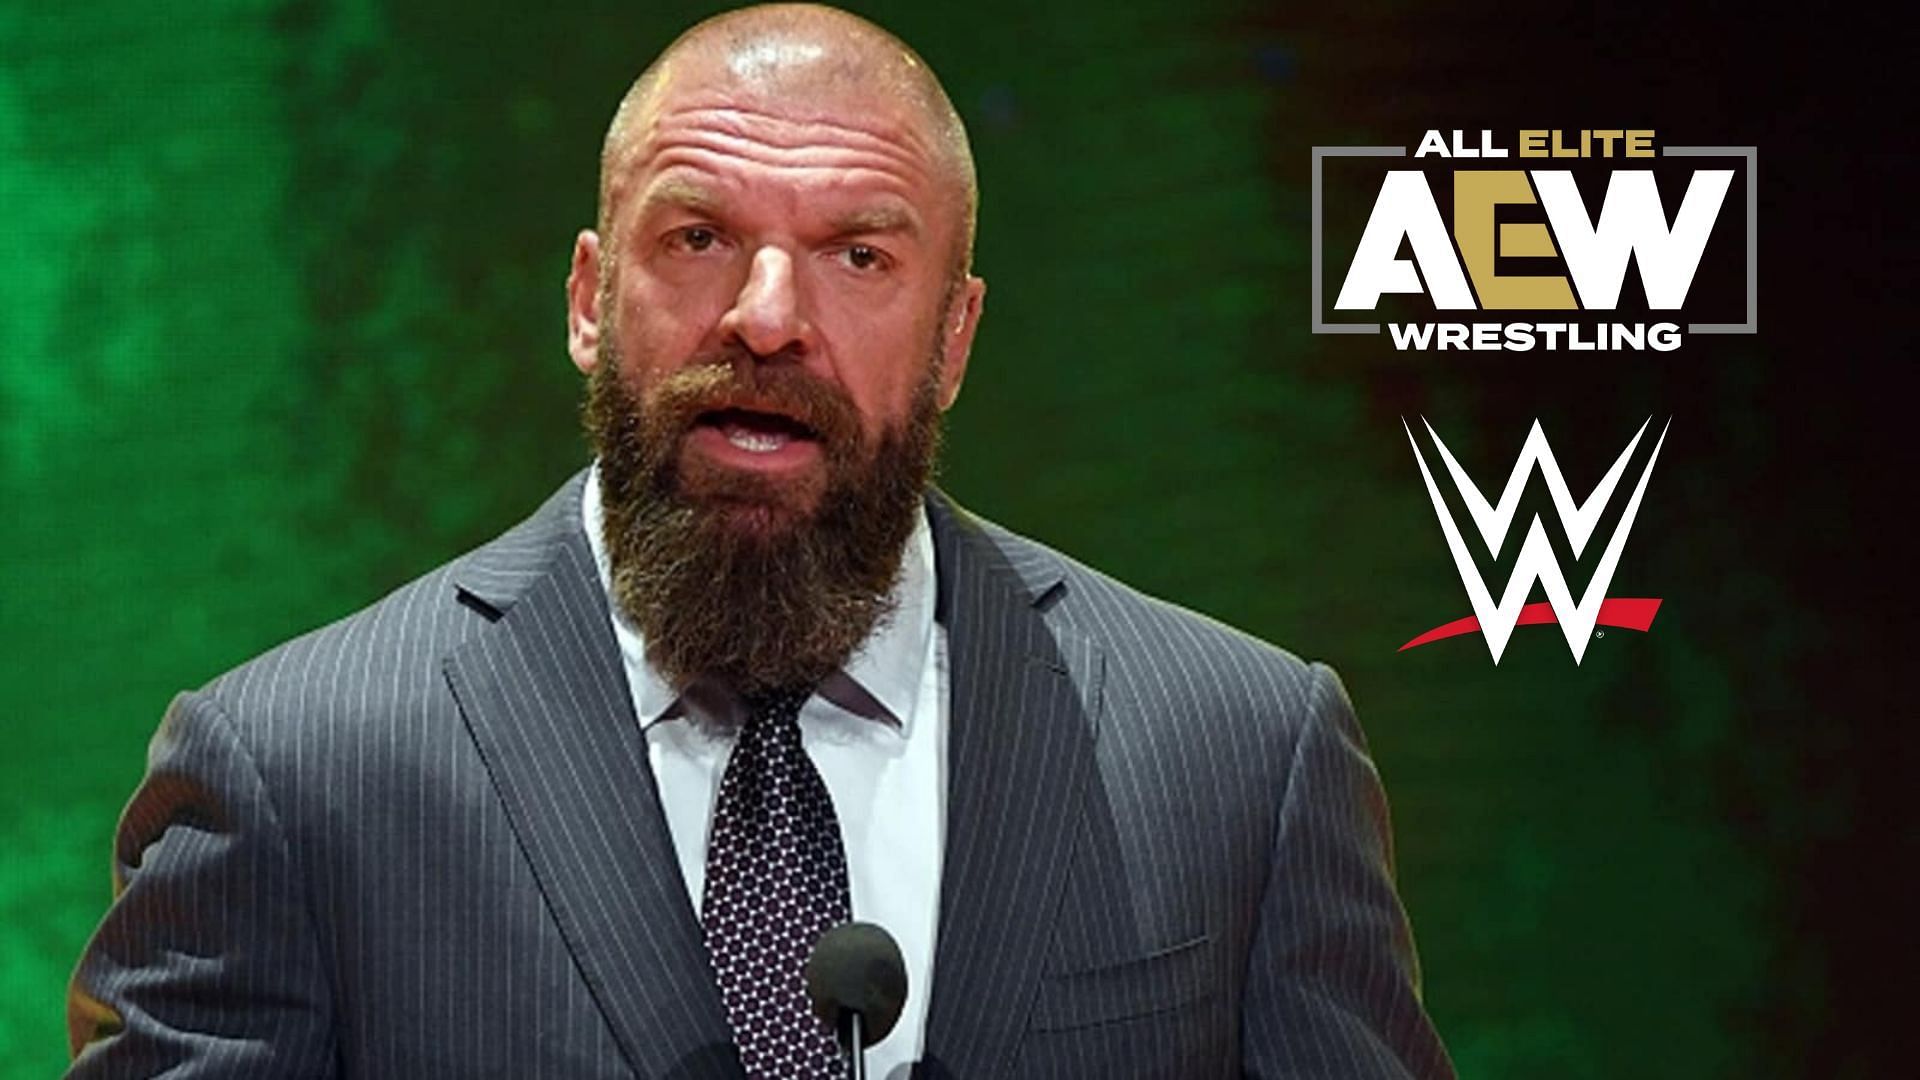 Triple H has taken over as Head of Creative for WWE